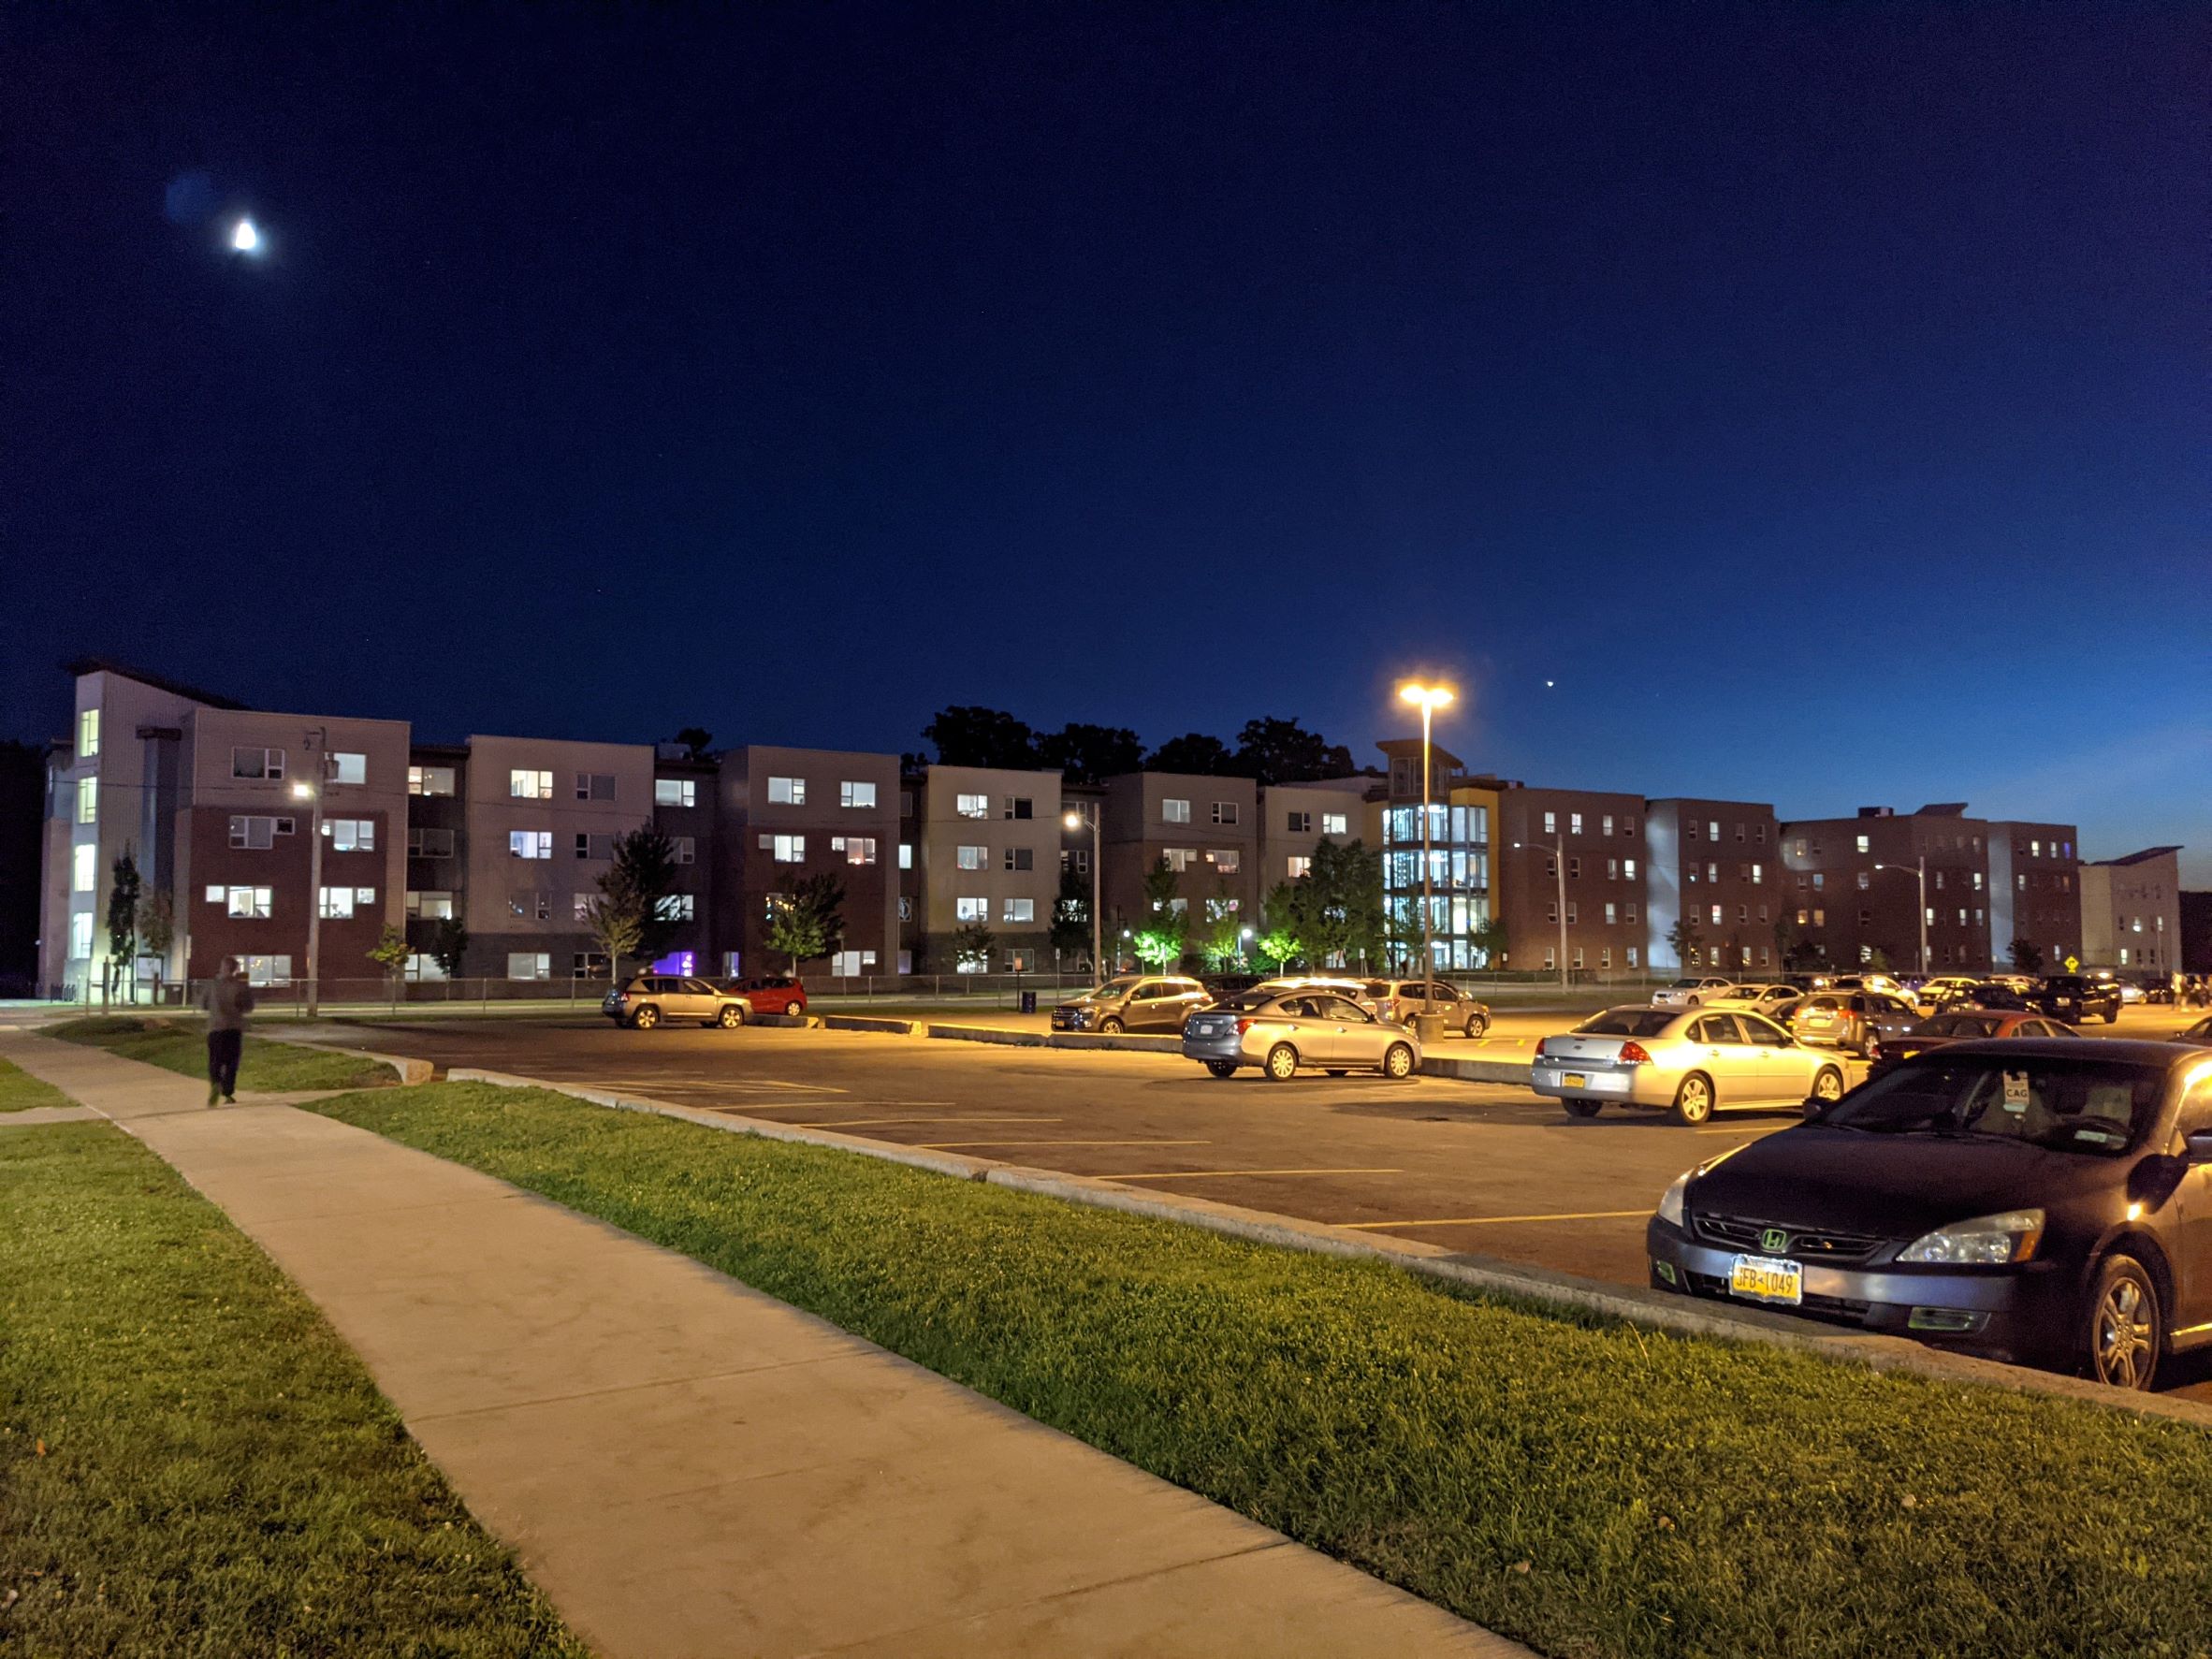 Night shot of overall Long discontinues student housing building with large wooden ranger tower lit up at night with sunset in background, appears as a row of many rowhouses